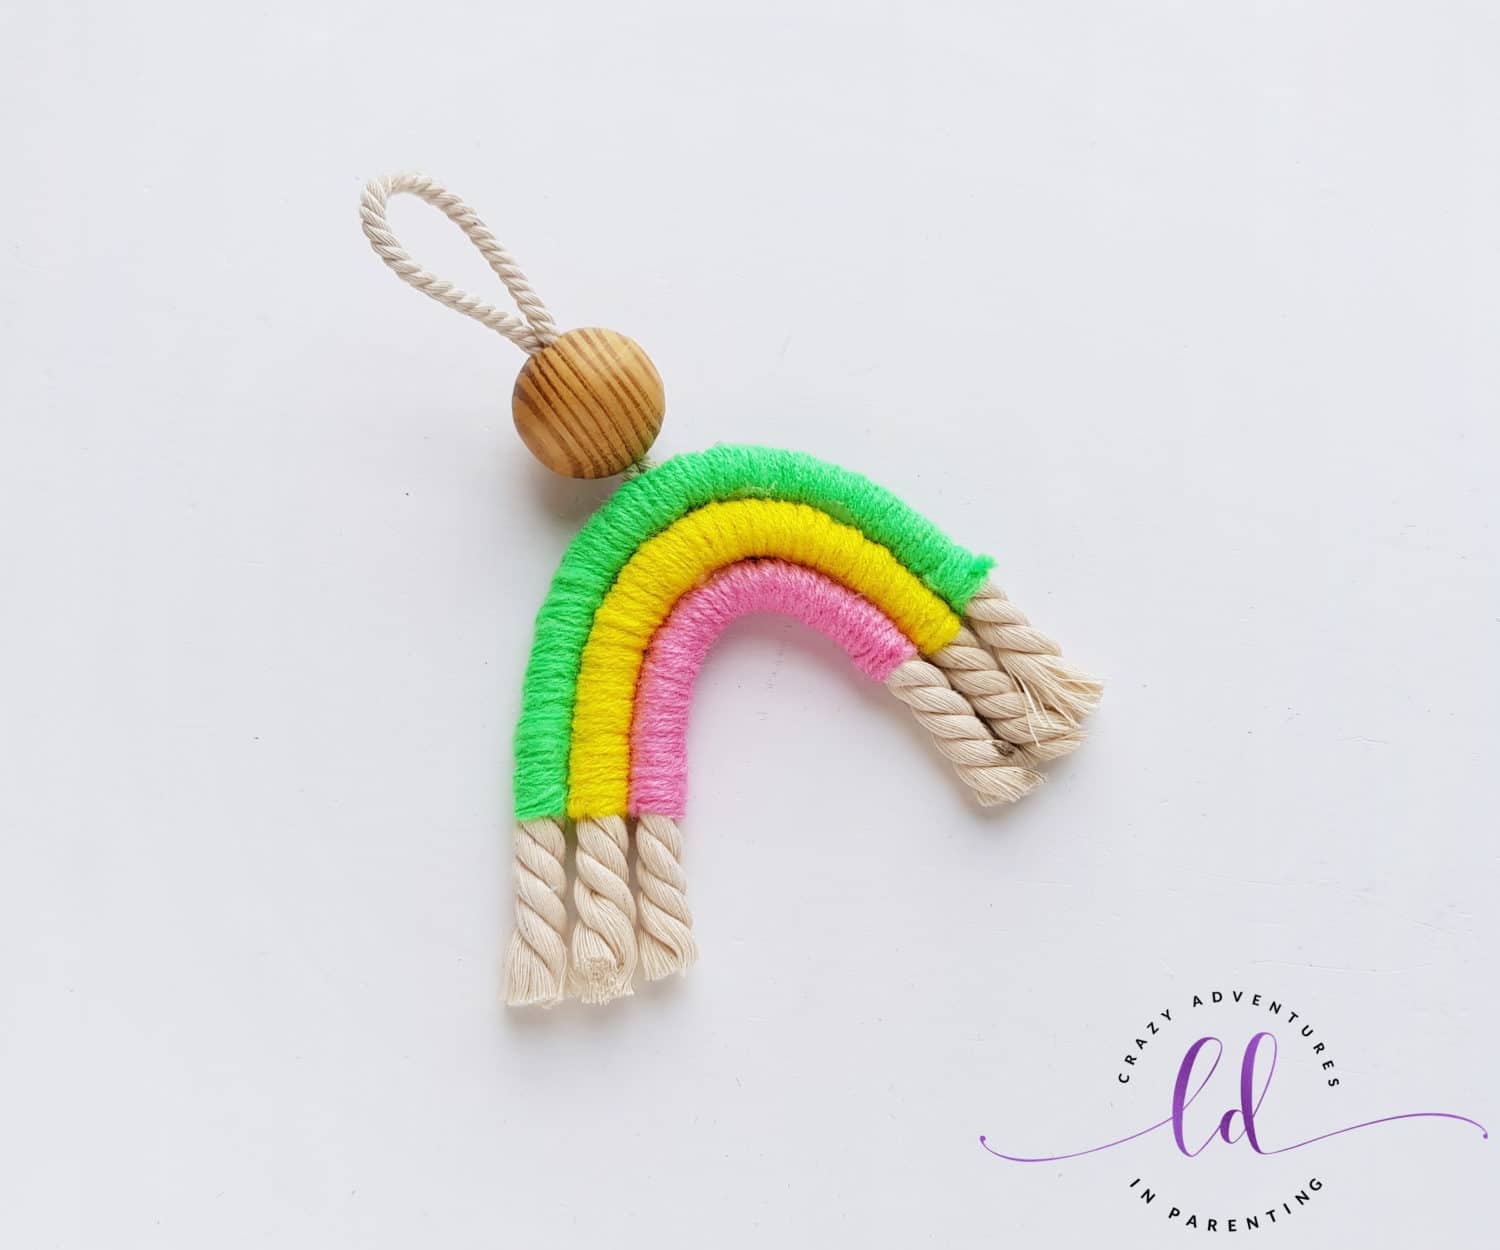 Trimmed Fabric and Ropes to Make a Macrame Rainbow Charm